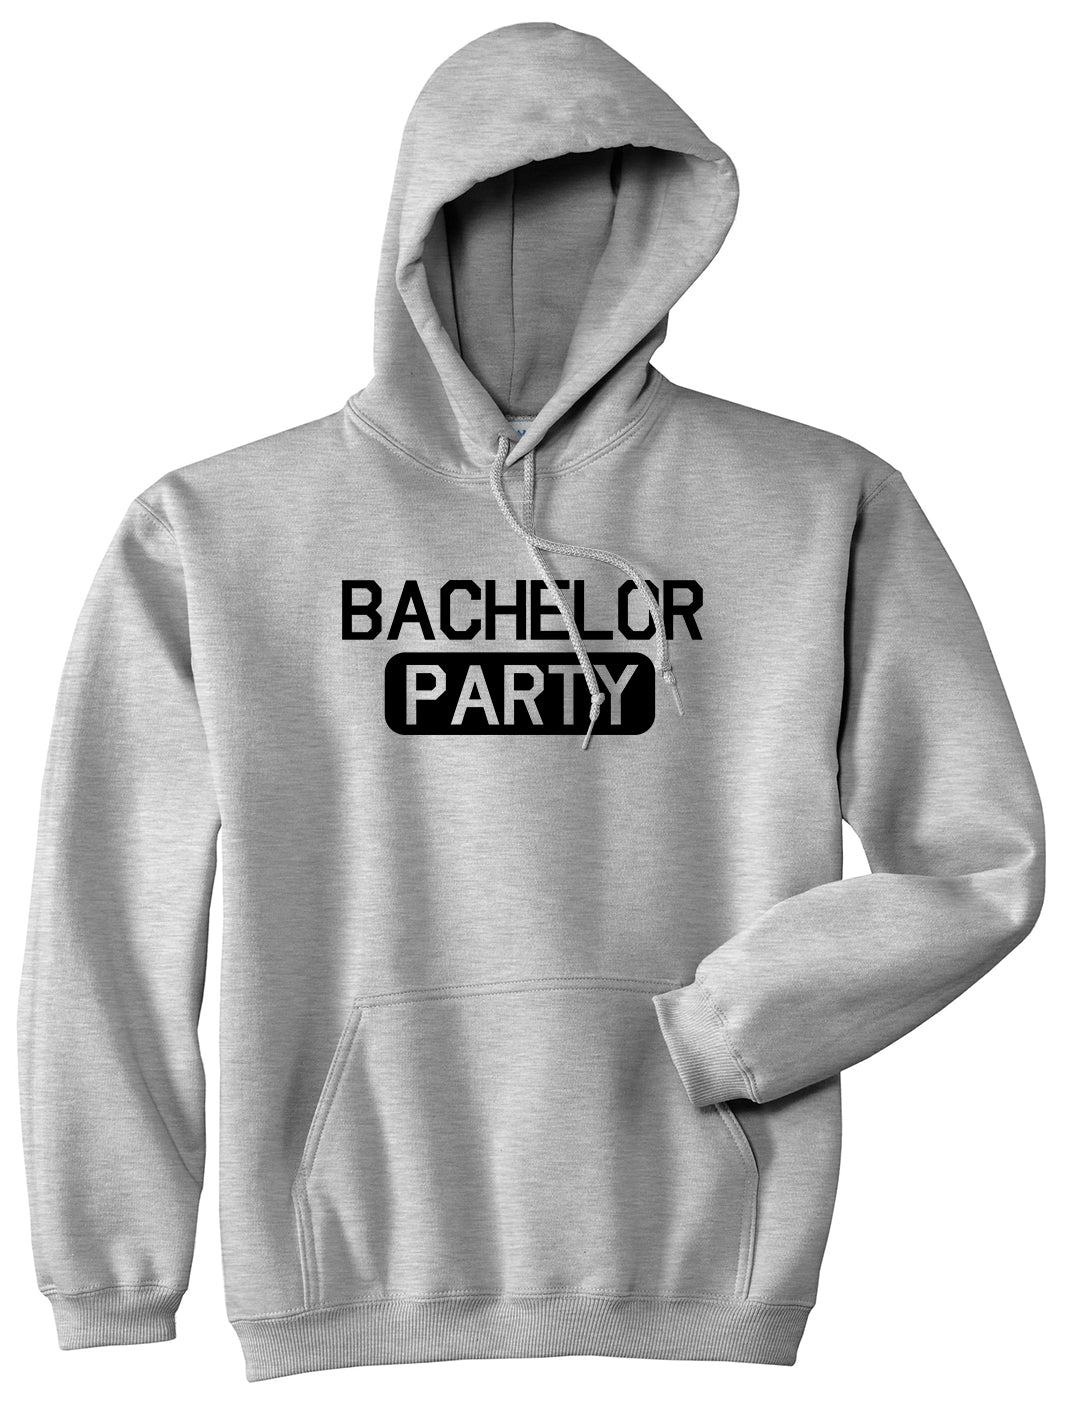 Bachelor Party Grey Pullover Hoodie by Kings Of NY